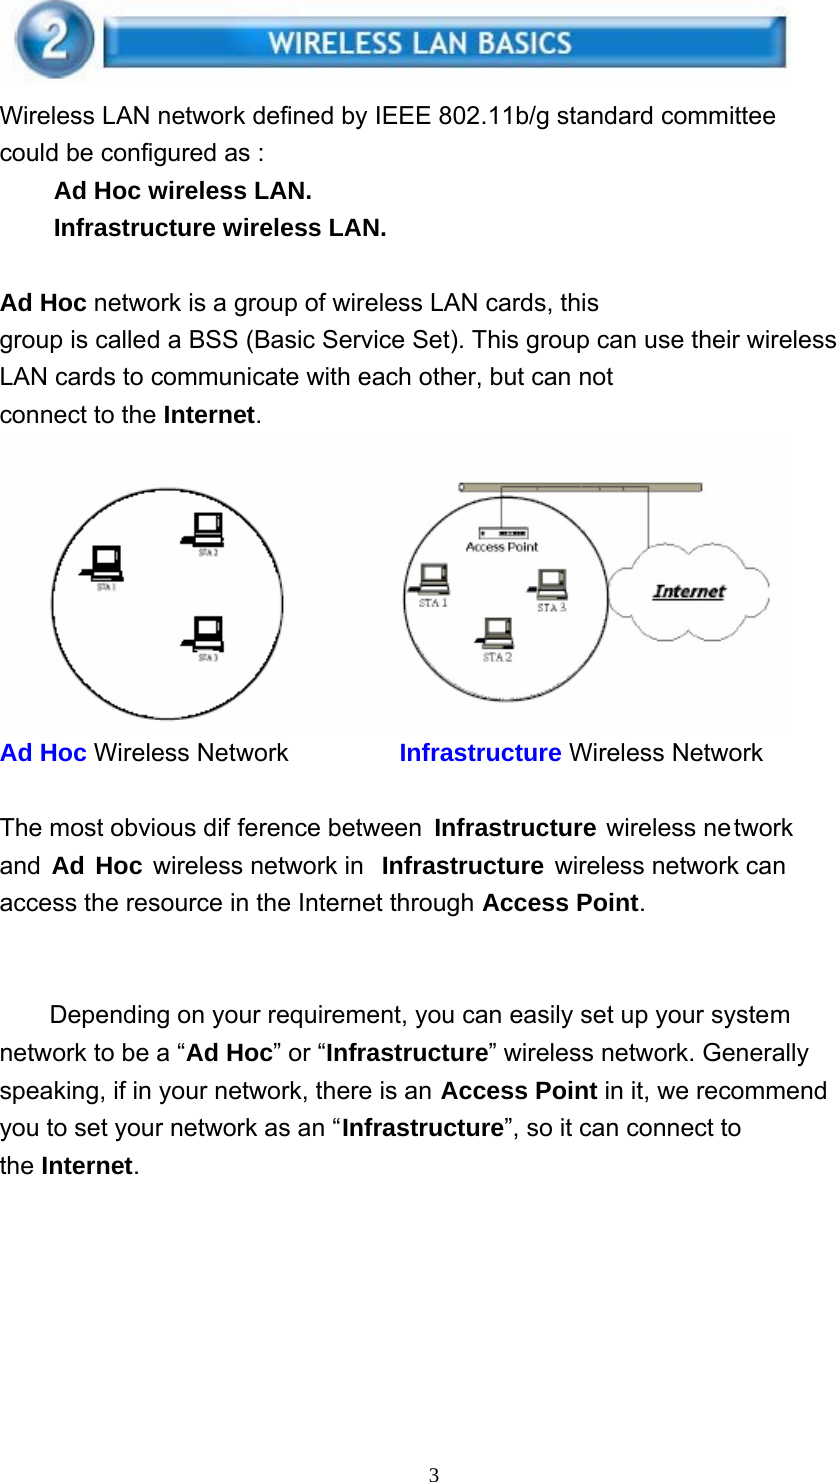 3     Wireless LAN network defined by IEEE 802.11b/g standard committee could be configured as : Ad Hoc wireless LAN. Infrastructure wireless LAN.   Ad Hoc network is a group of wireless LAN cards, this group is called a BSS (Basic Service Set). This group can use their wireless LAN cards to communicate with each other, but can not connect to the Internet.  Ad Hoc Wireless Network  Infrastructure Wireless Network   The most obvious dif ference between Infrastructure wireless network and  Ad Hoc wireless network in  Infrastructure wireless network can access the resource in the Internet through Access Point.     Depending on your requirement, you can easily set up your system network to be a “Ad Hoc” or “Infrastructure” wireless network. Generally speaking, if in your network, there is an Access Point in it, we recommend you to set your network as an “Infrastructure”, so it can connect to the Internet. 